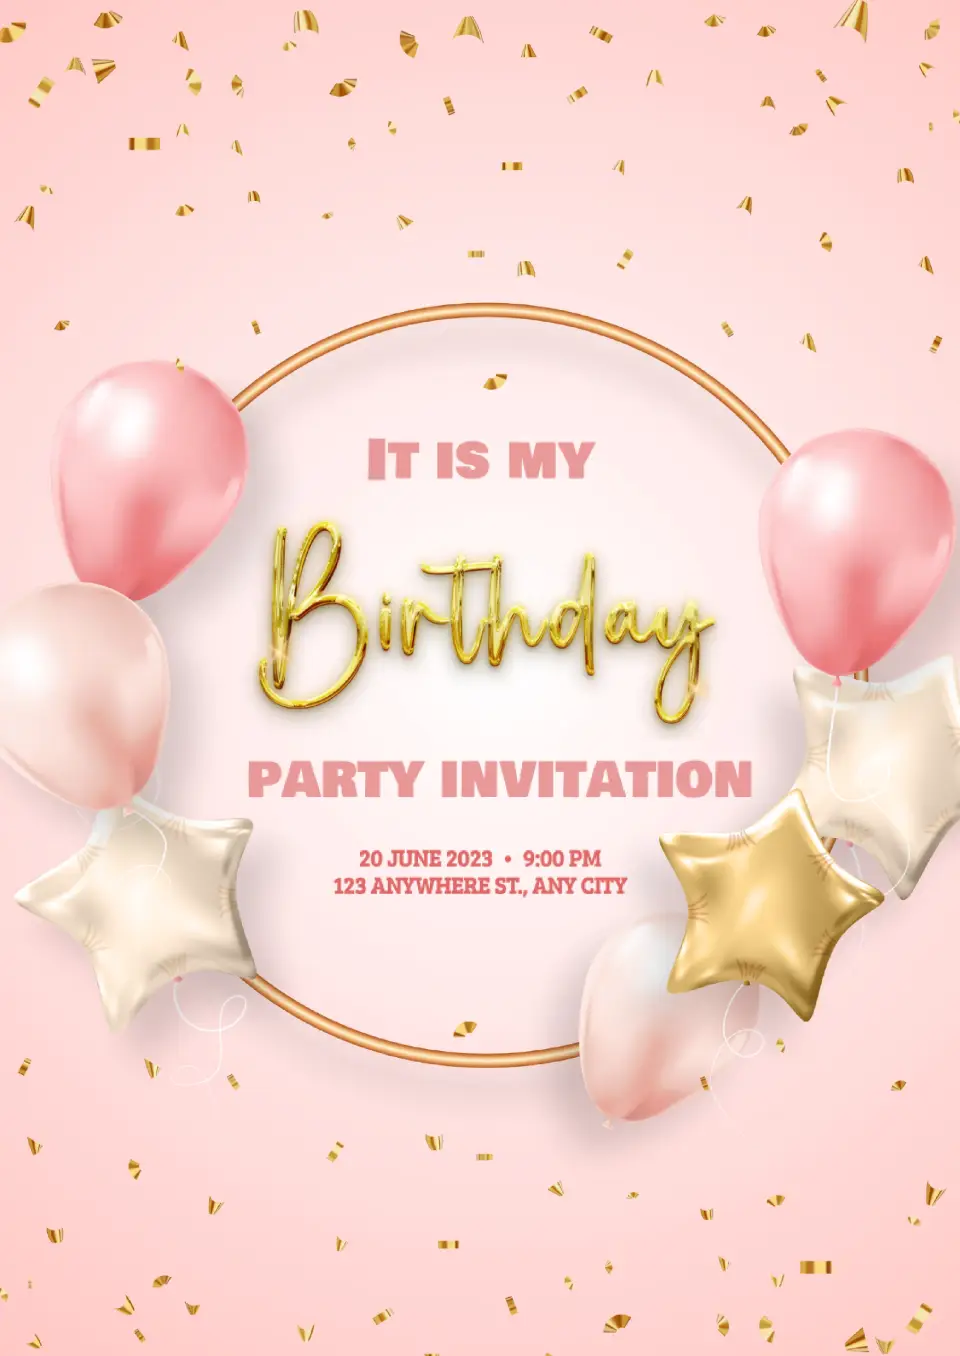 Birthday Party Invitation Template for Google Docs